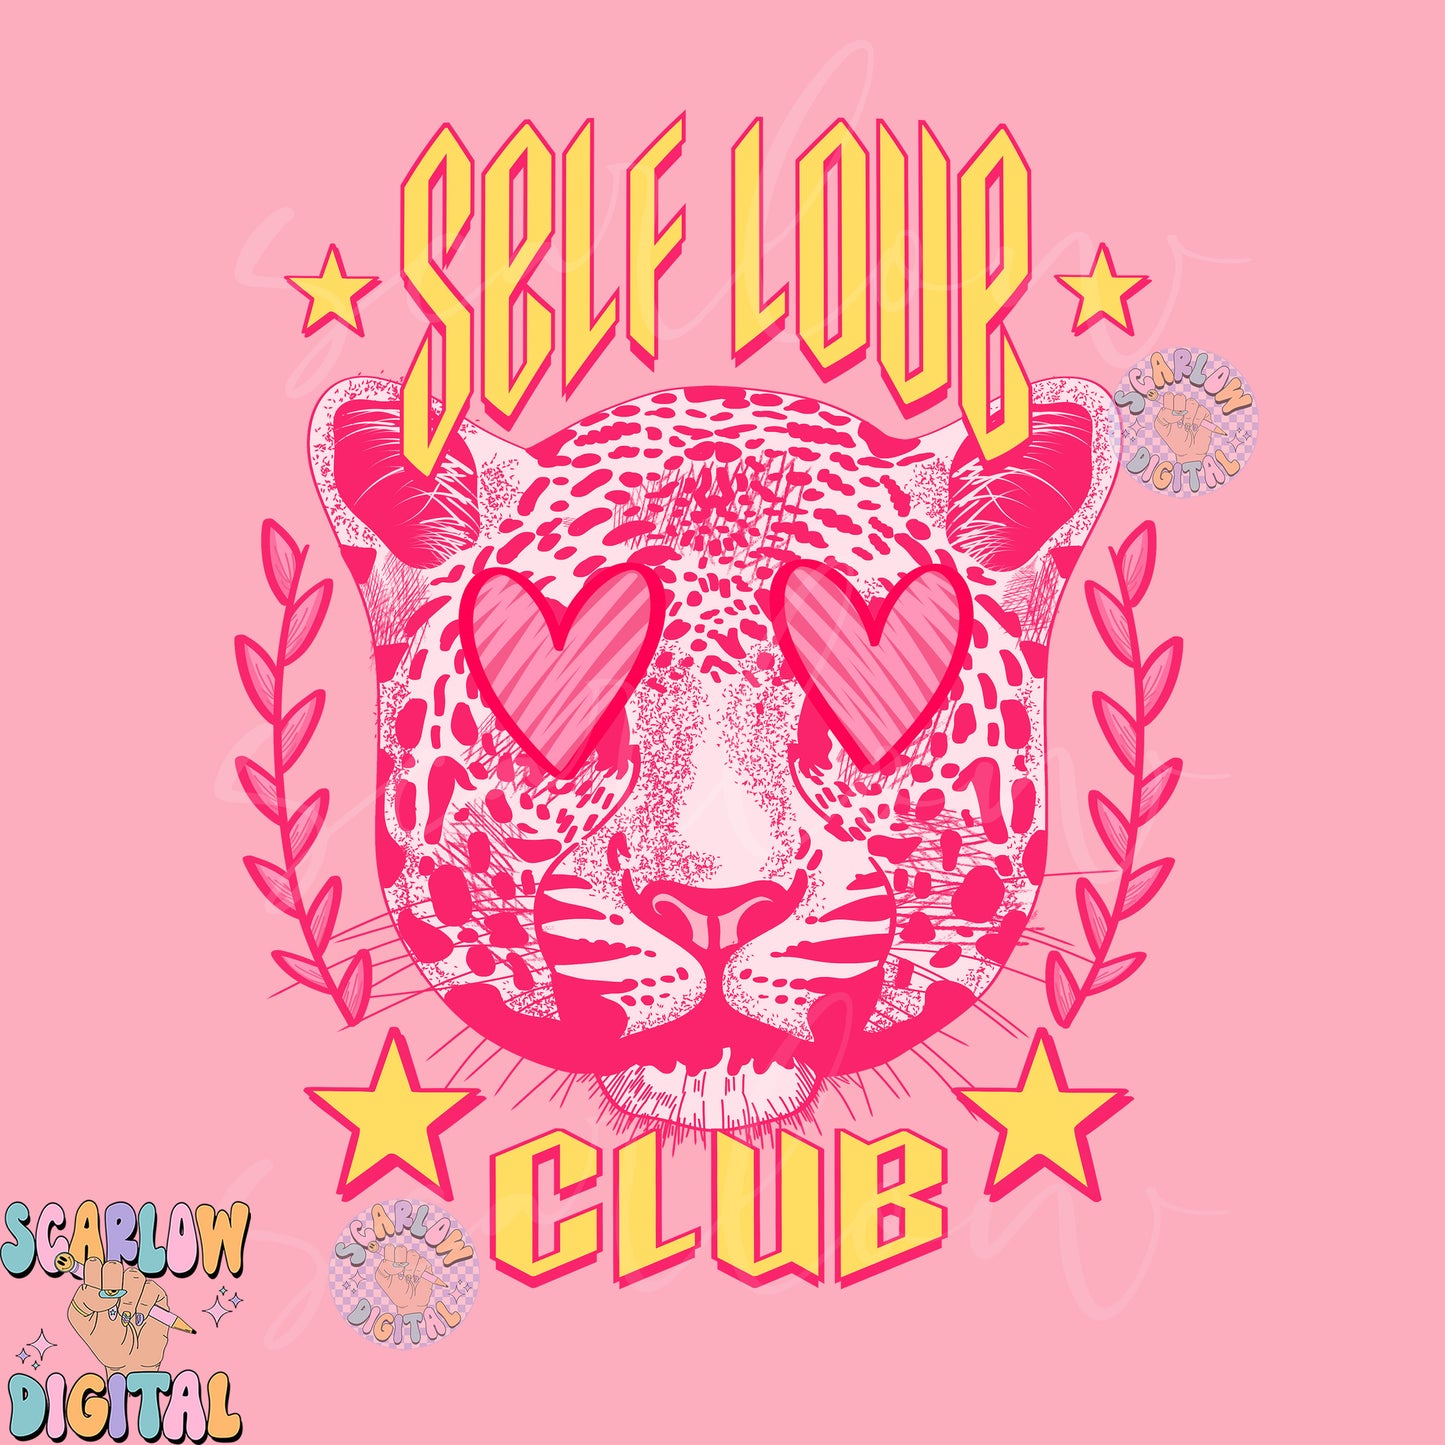 Self Love Club PNG-Valentine's Day Sublimation Digital Design Download-snow leopard png, hearts png, girly valentine's png, self care png